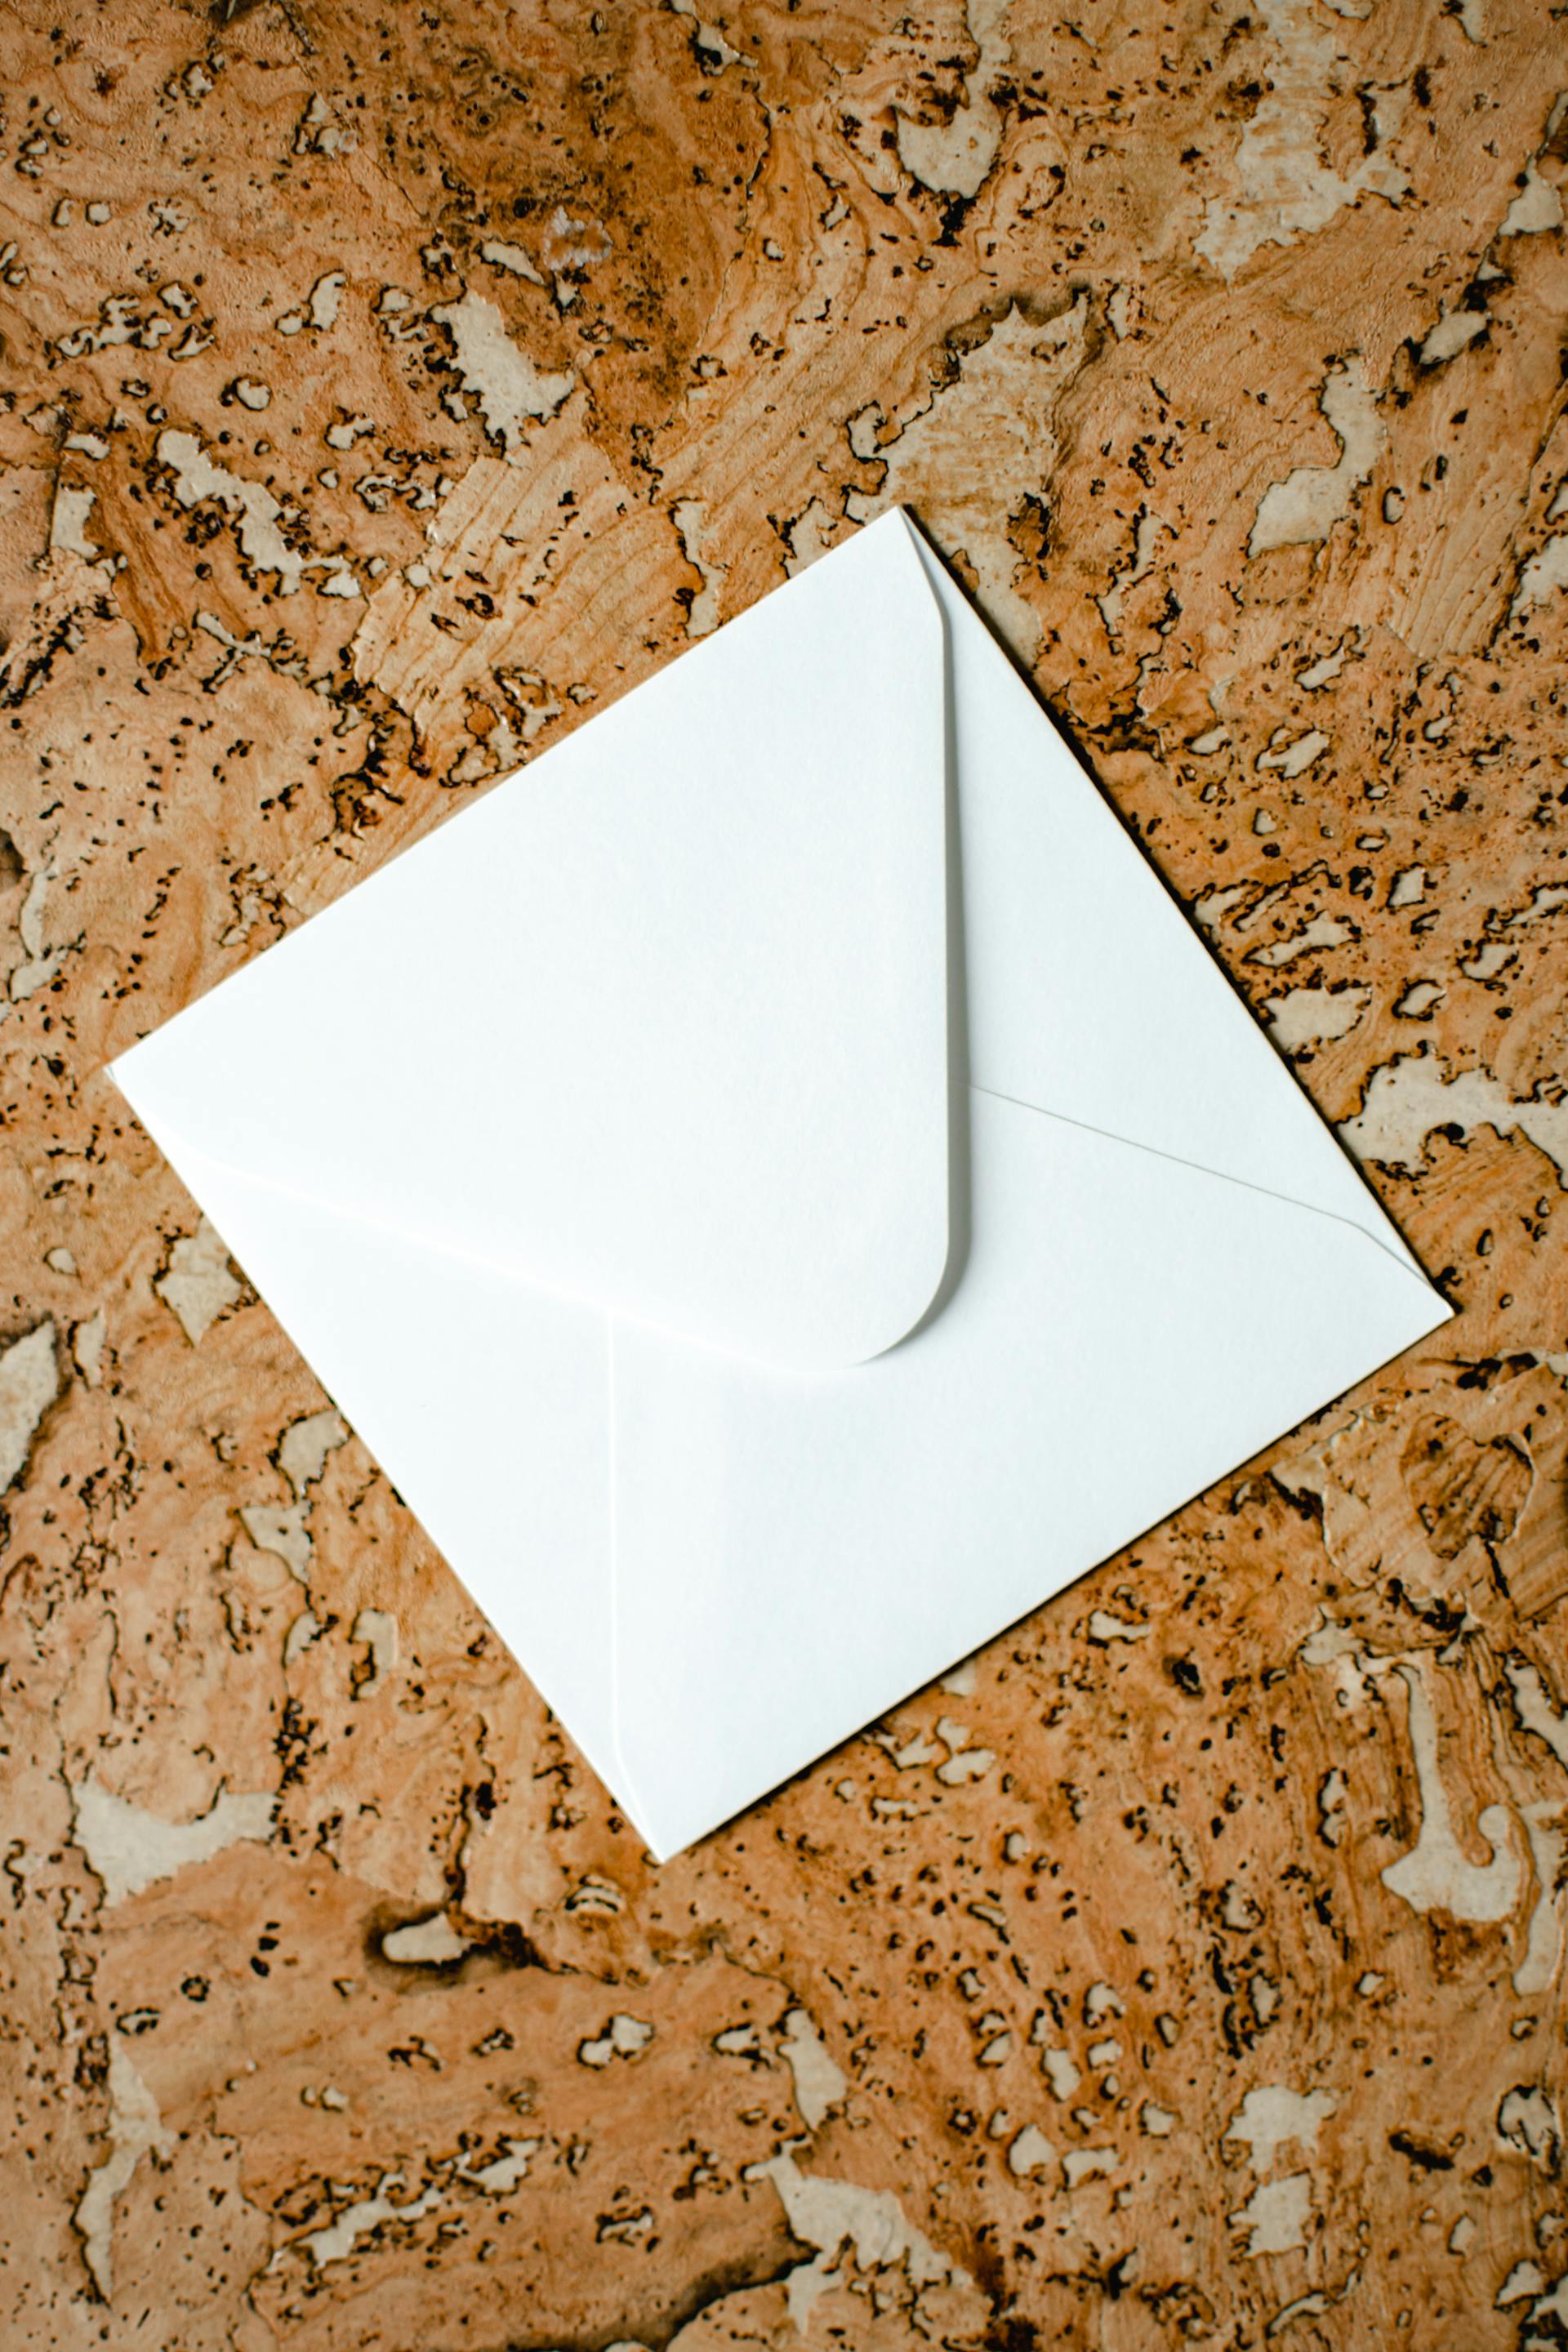 A white envelope lying on a table | Source: Pexels